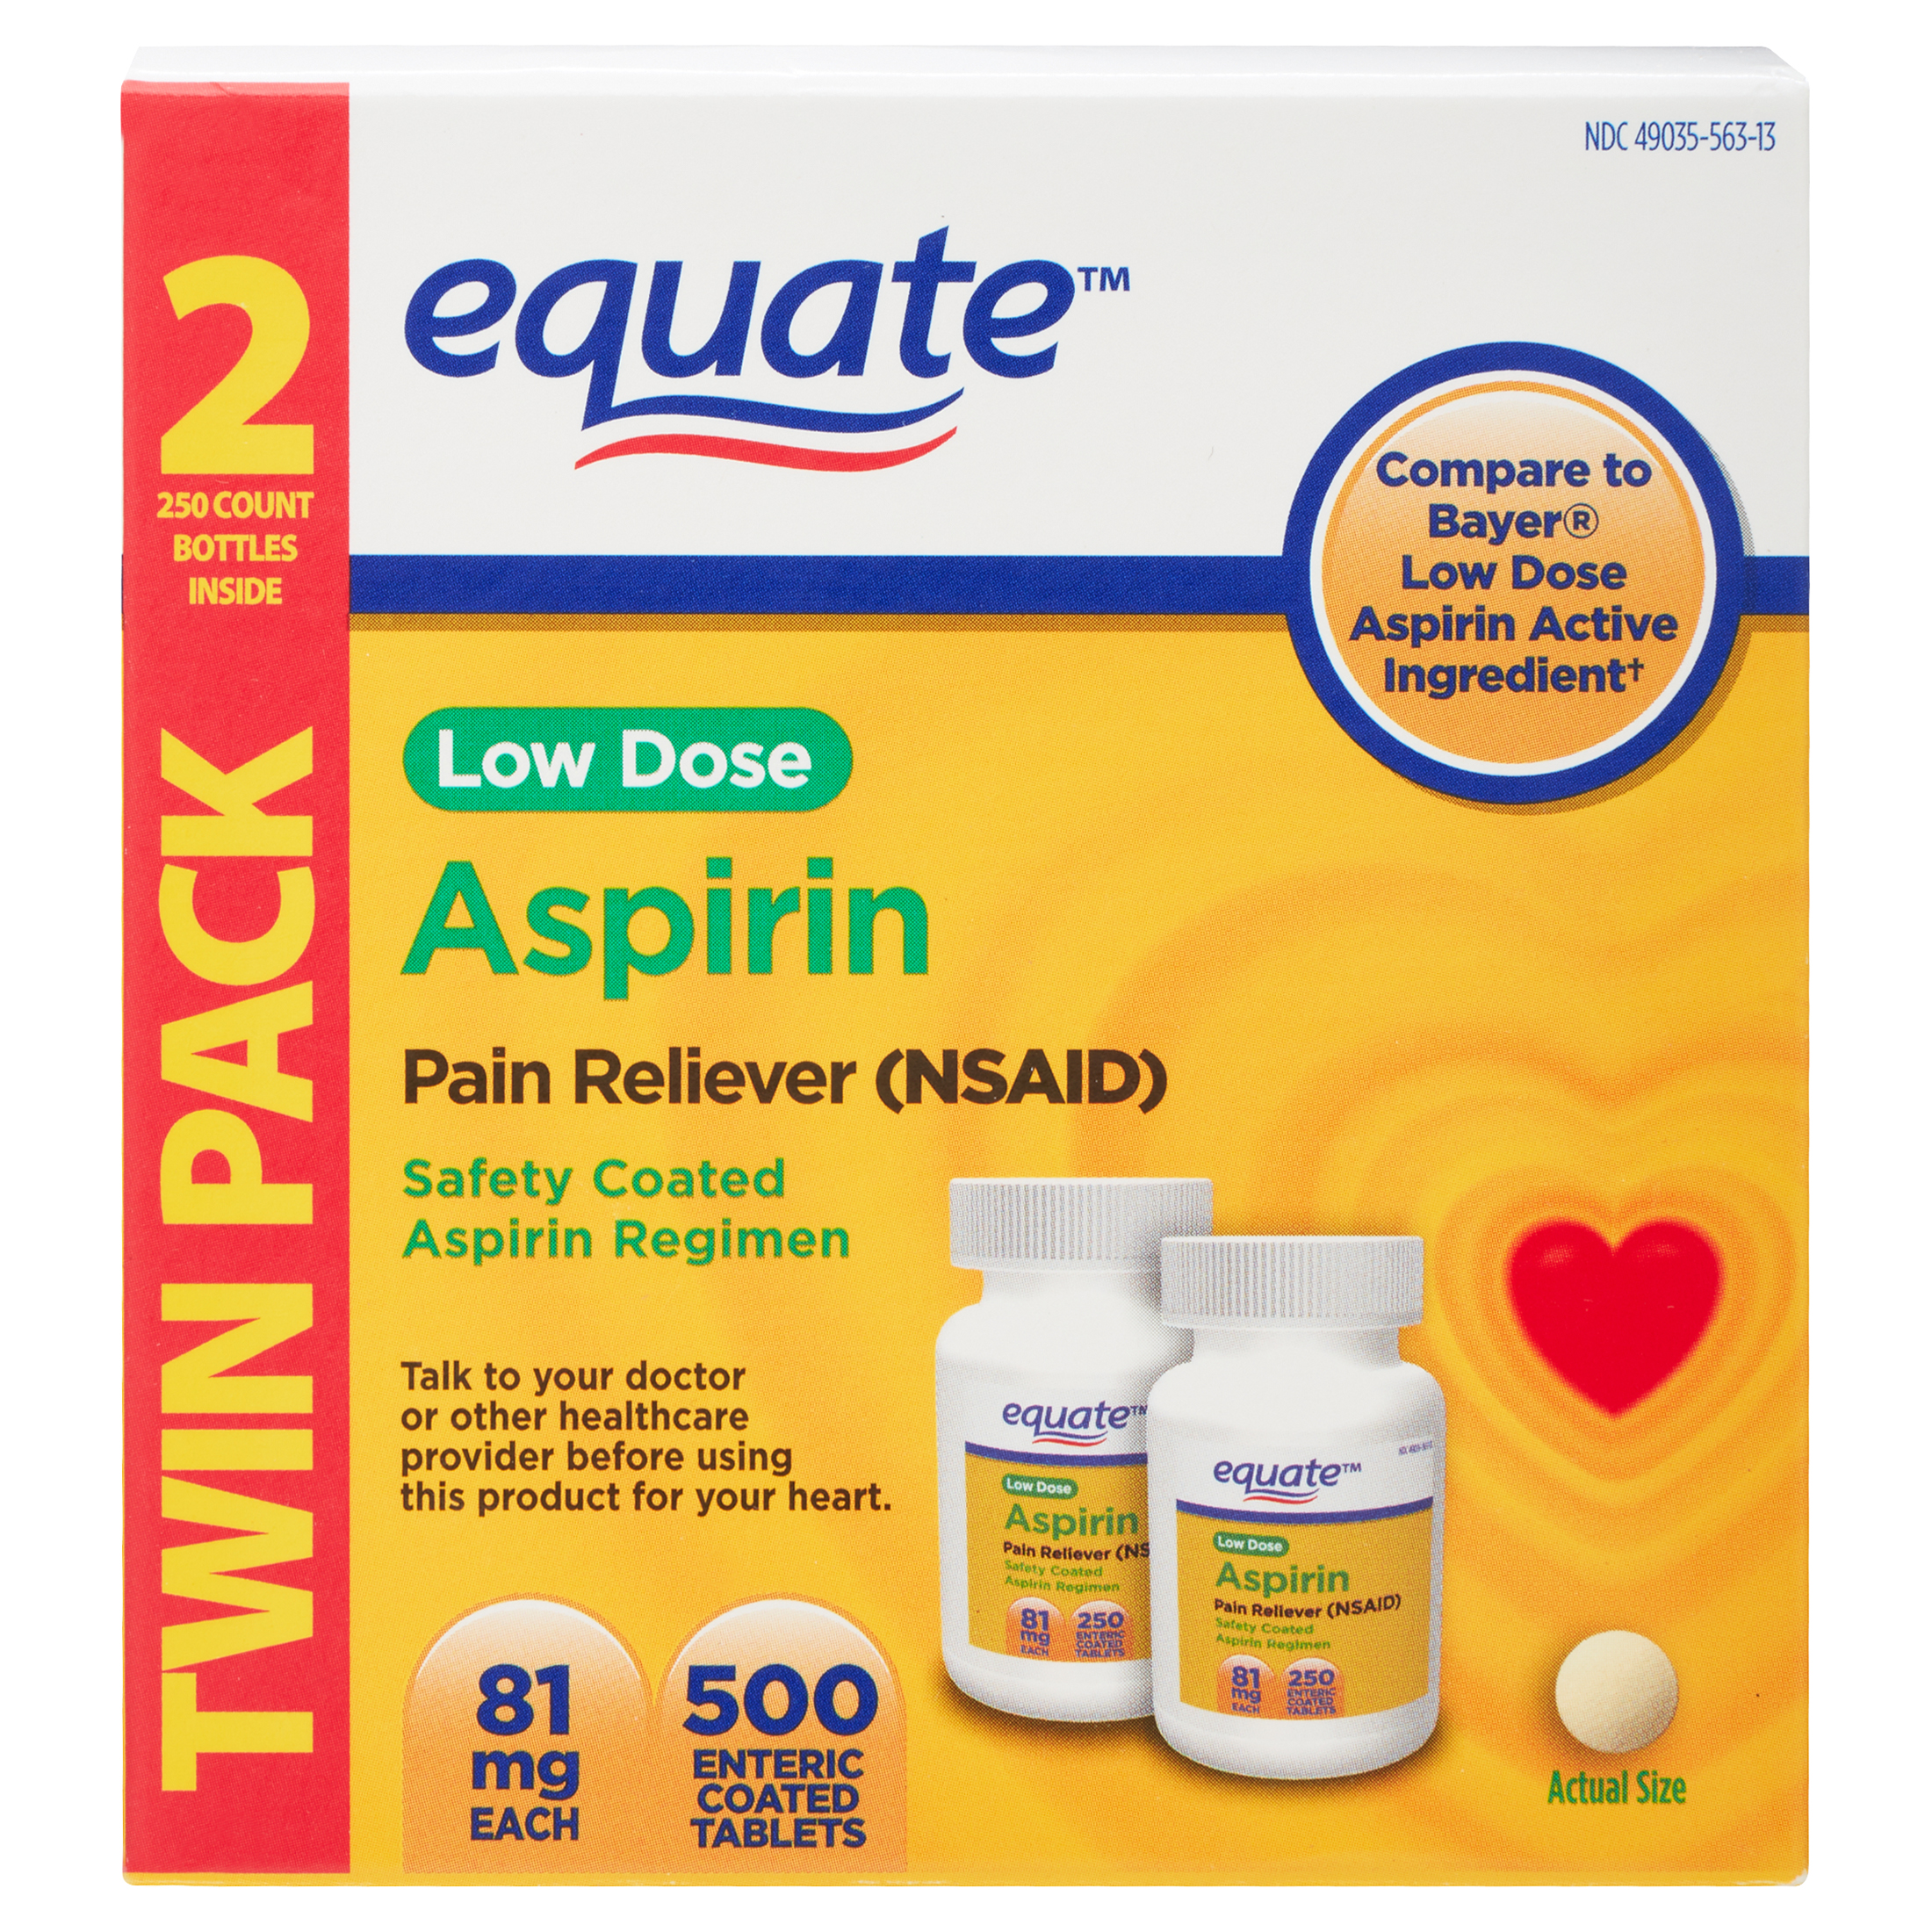 Equate Adult Low Dose Aspirin Safety Coated Tablets, 81 mg, 500 Count, 2 Pack - image 1 of 7